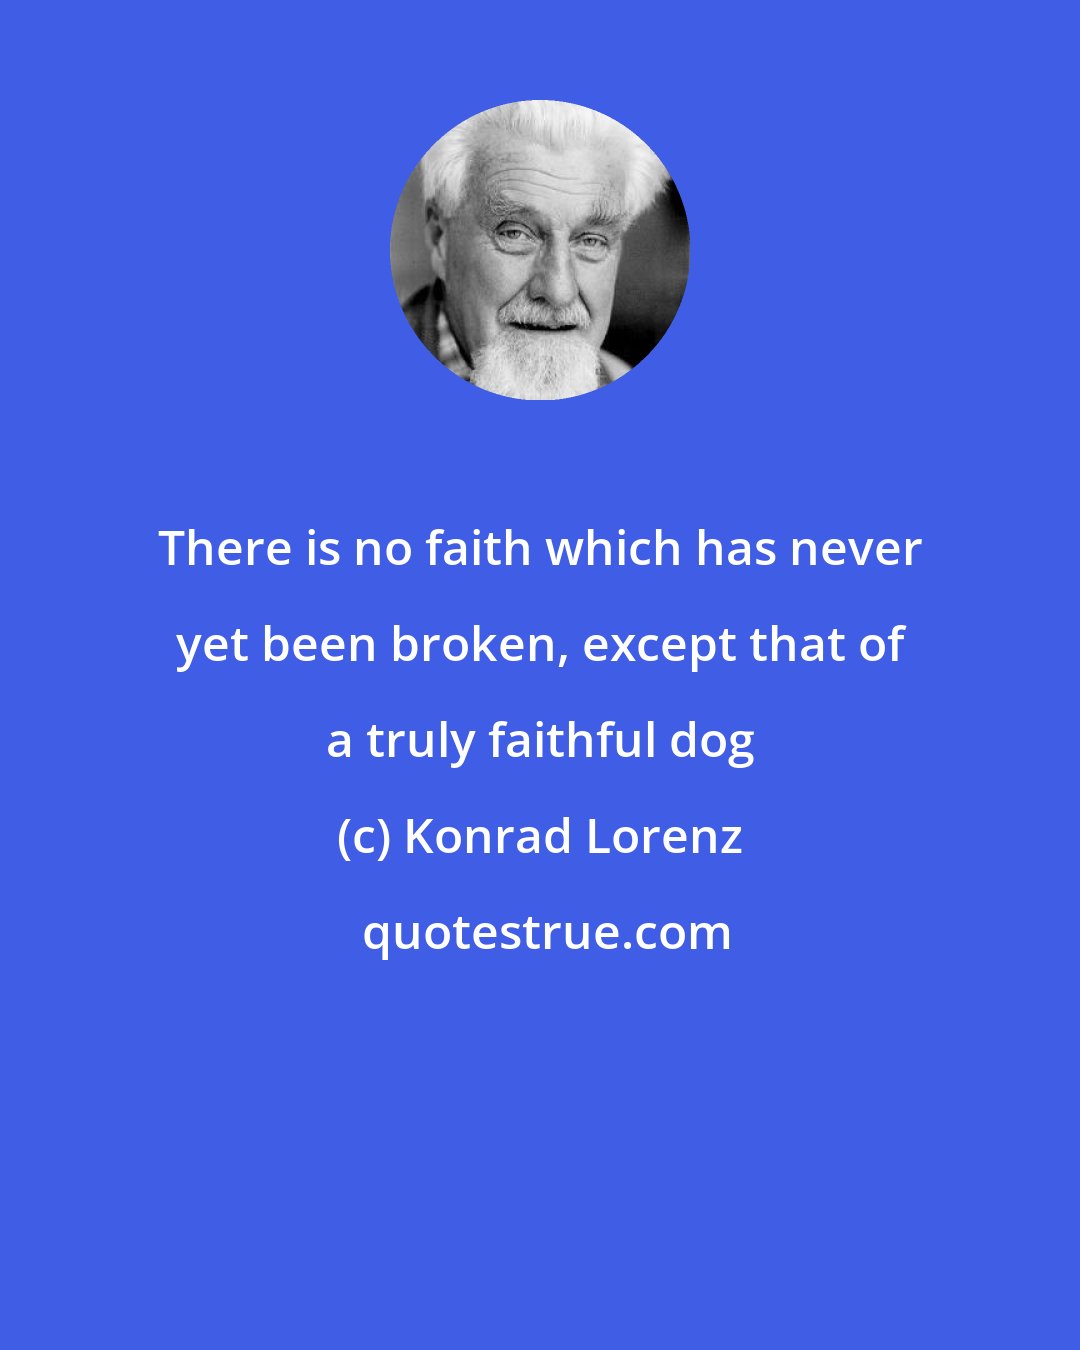 Konrad Lorenz: There is no faith which has never yet been broken, except that of a truly faithful dog